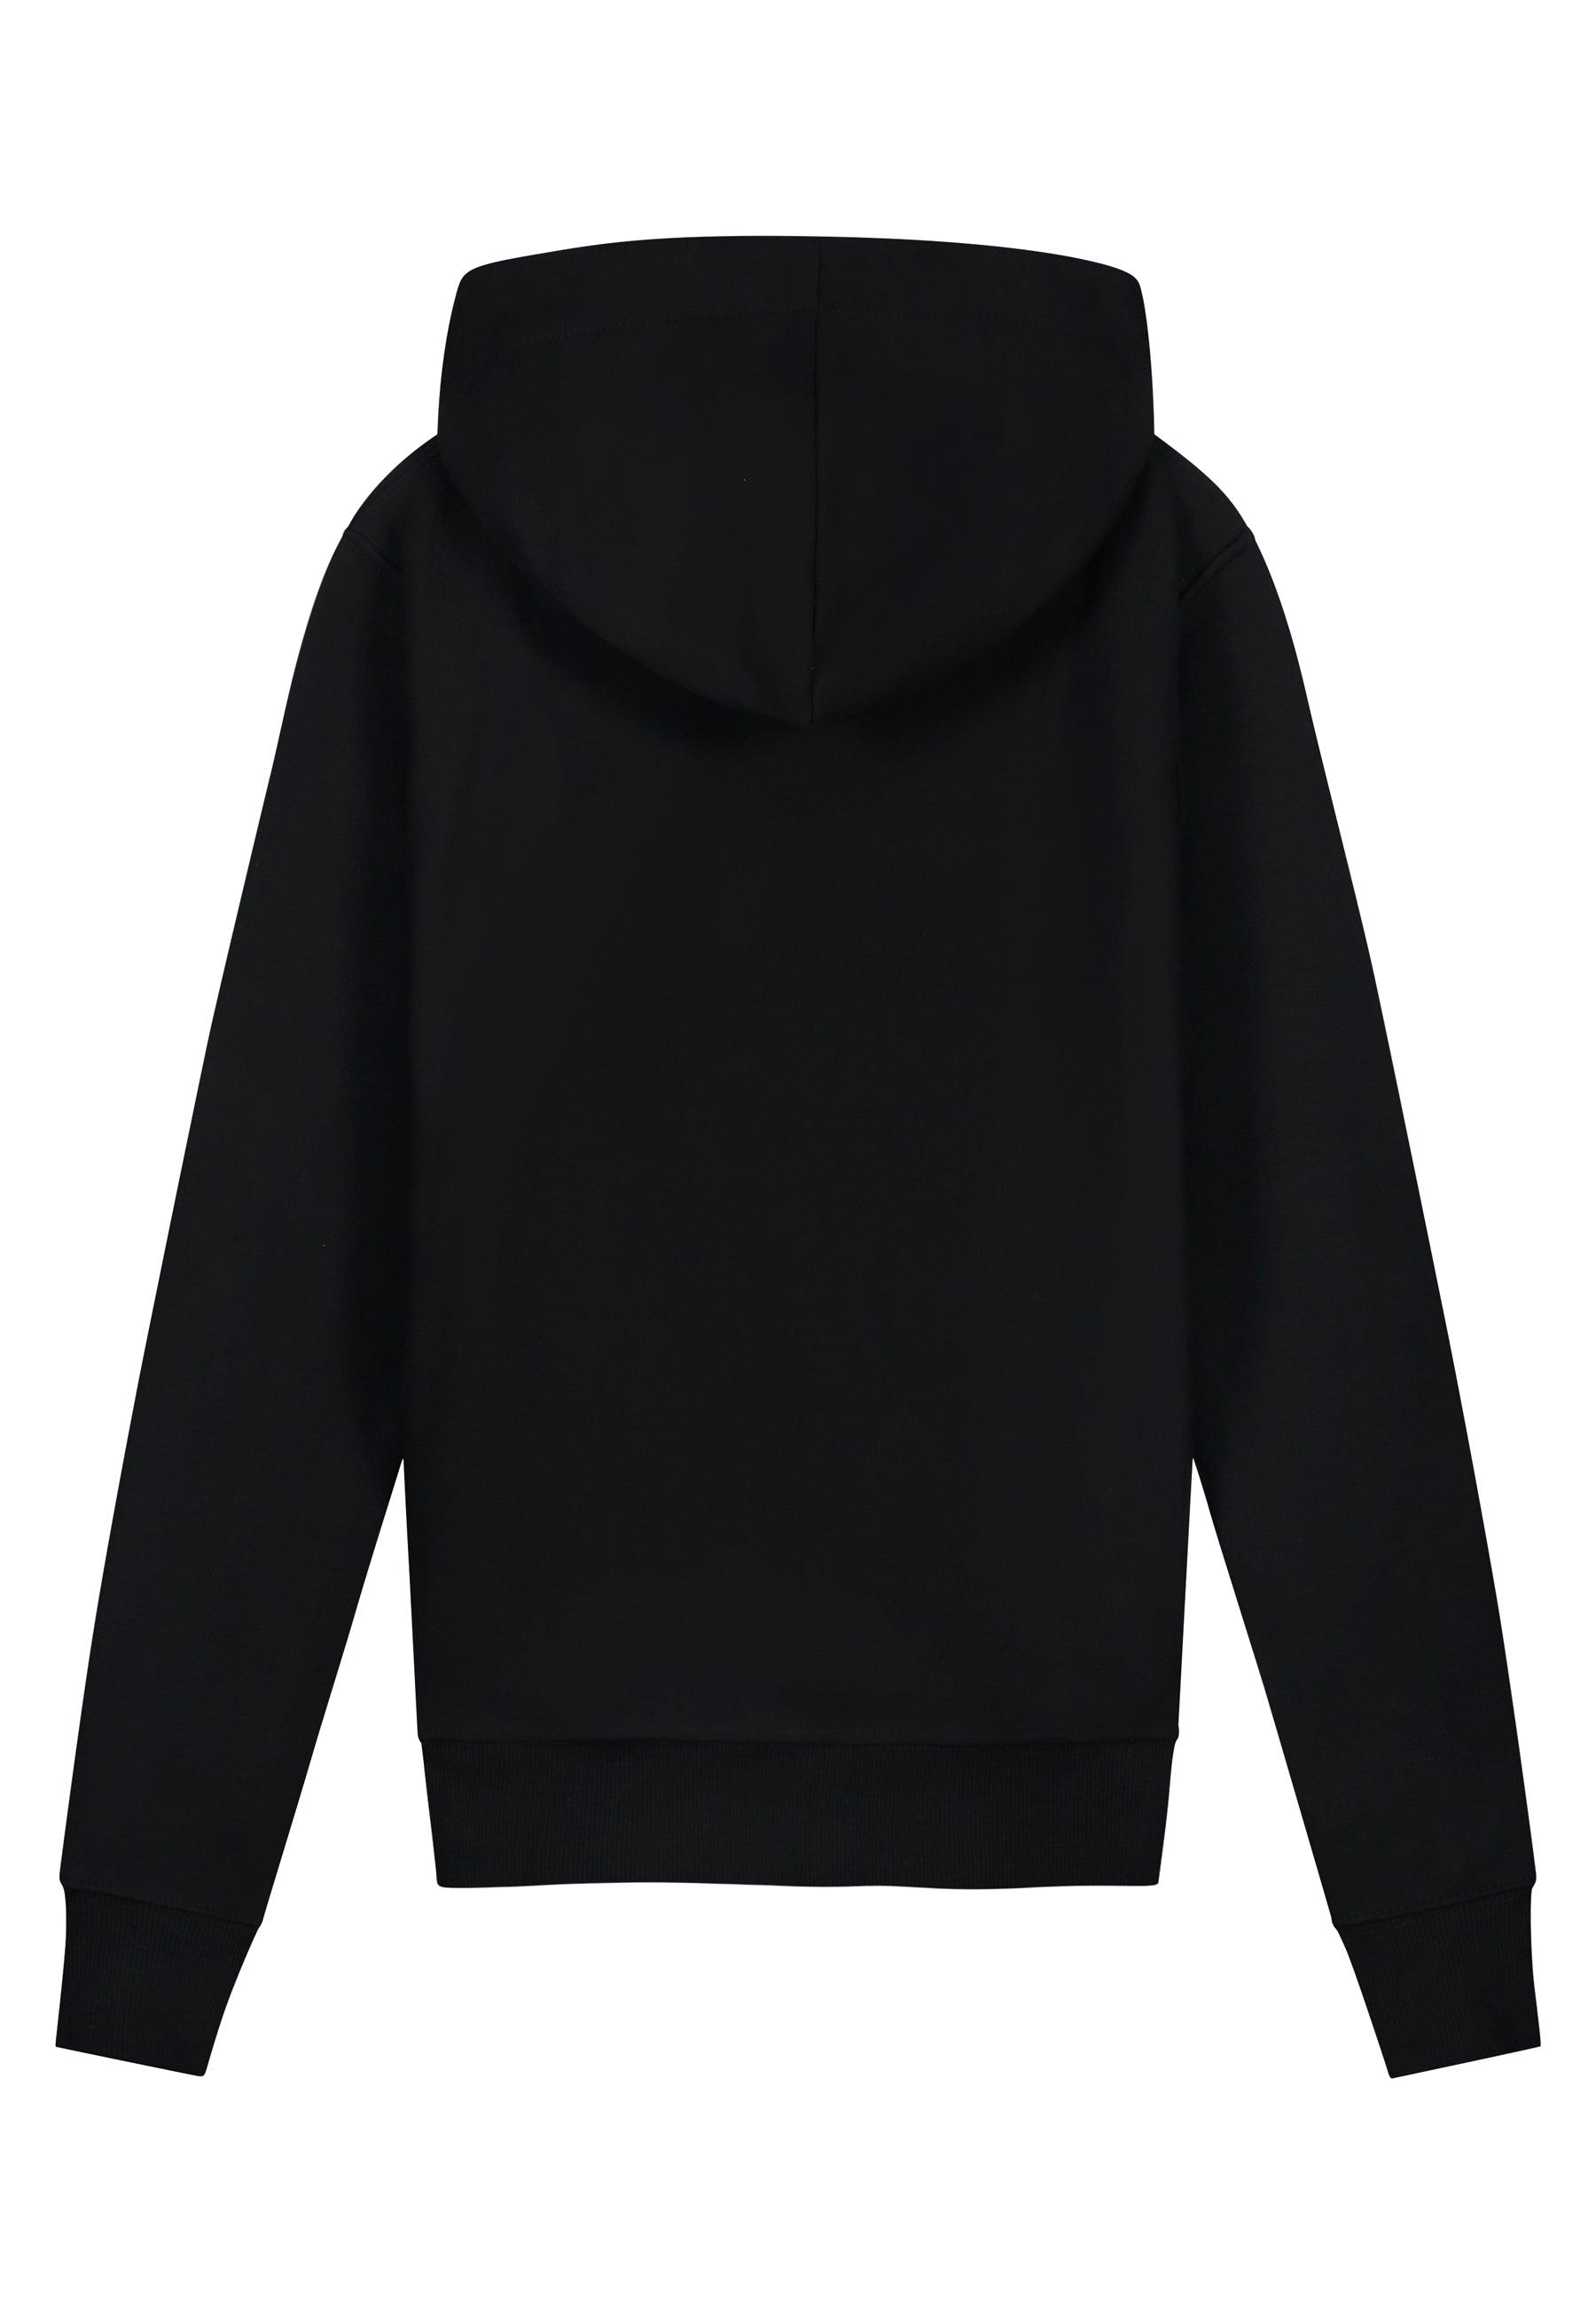 Black hoodie Amsterdam Artwork – The Label Collect